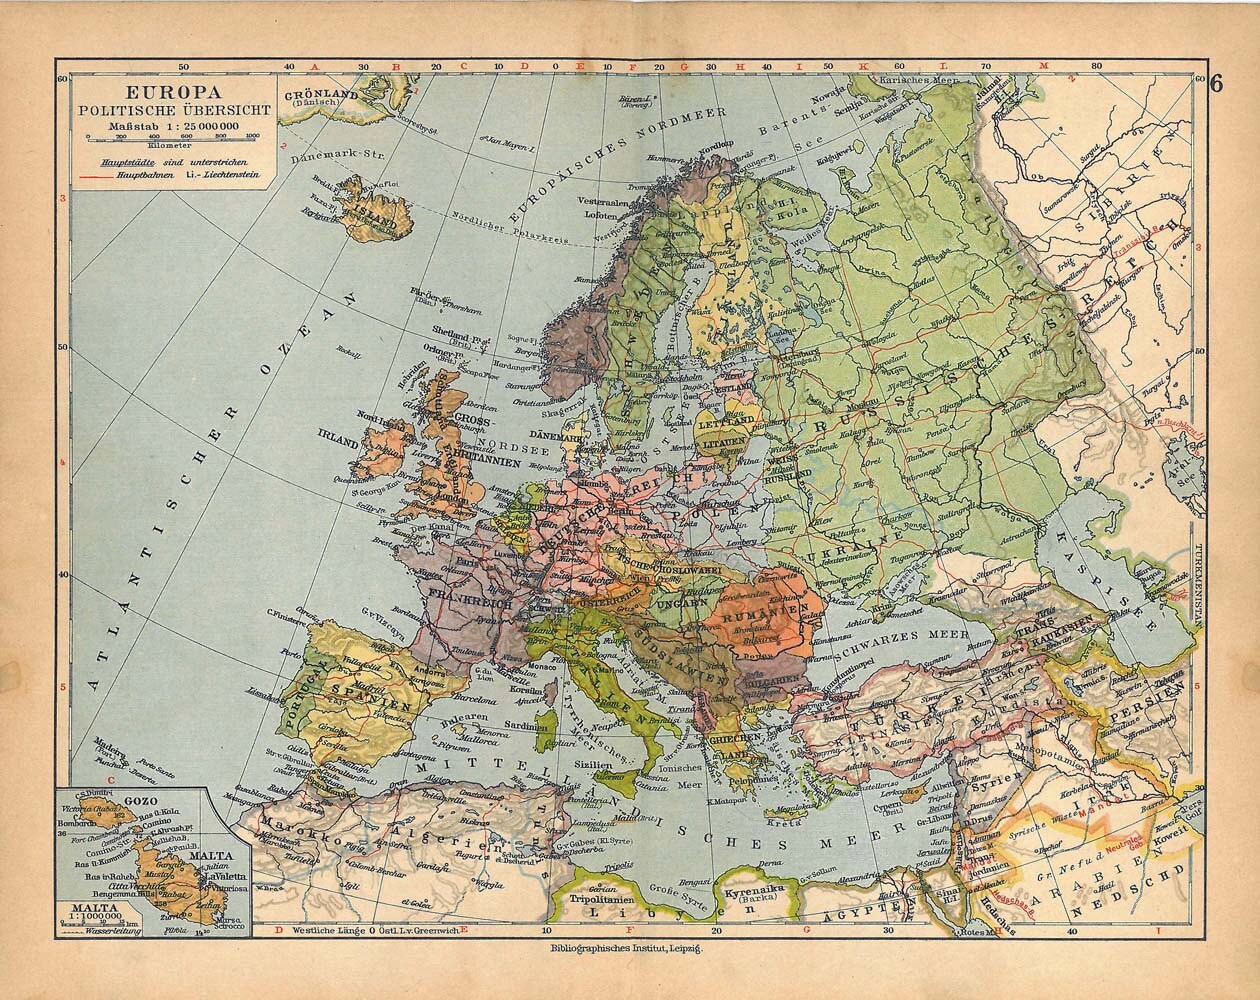 RESERVED 1928 Europe Vintage Map Political Division Wall Decor